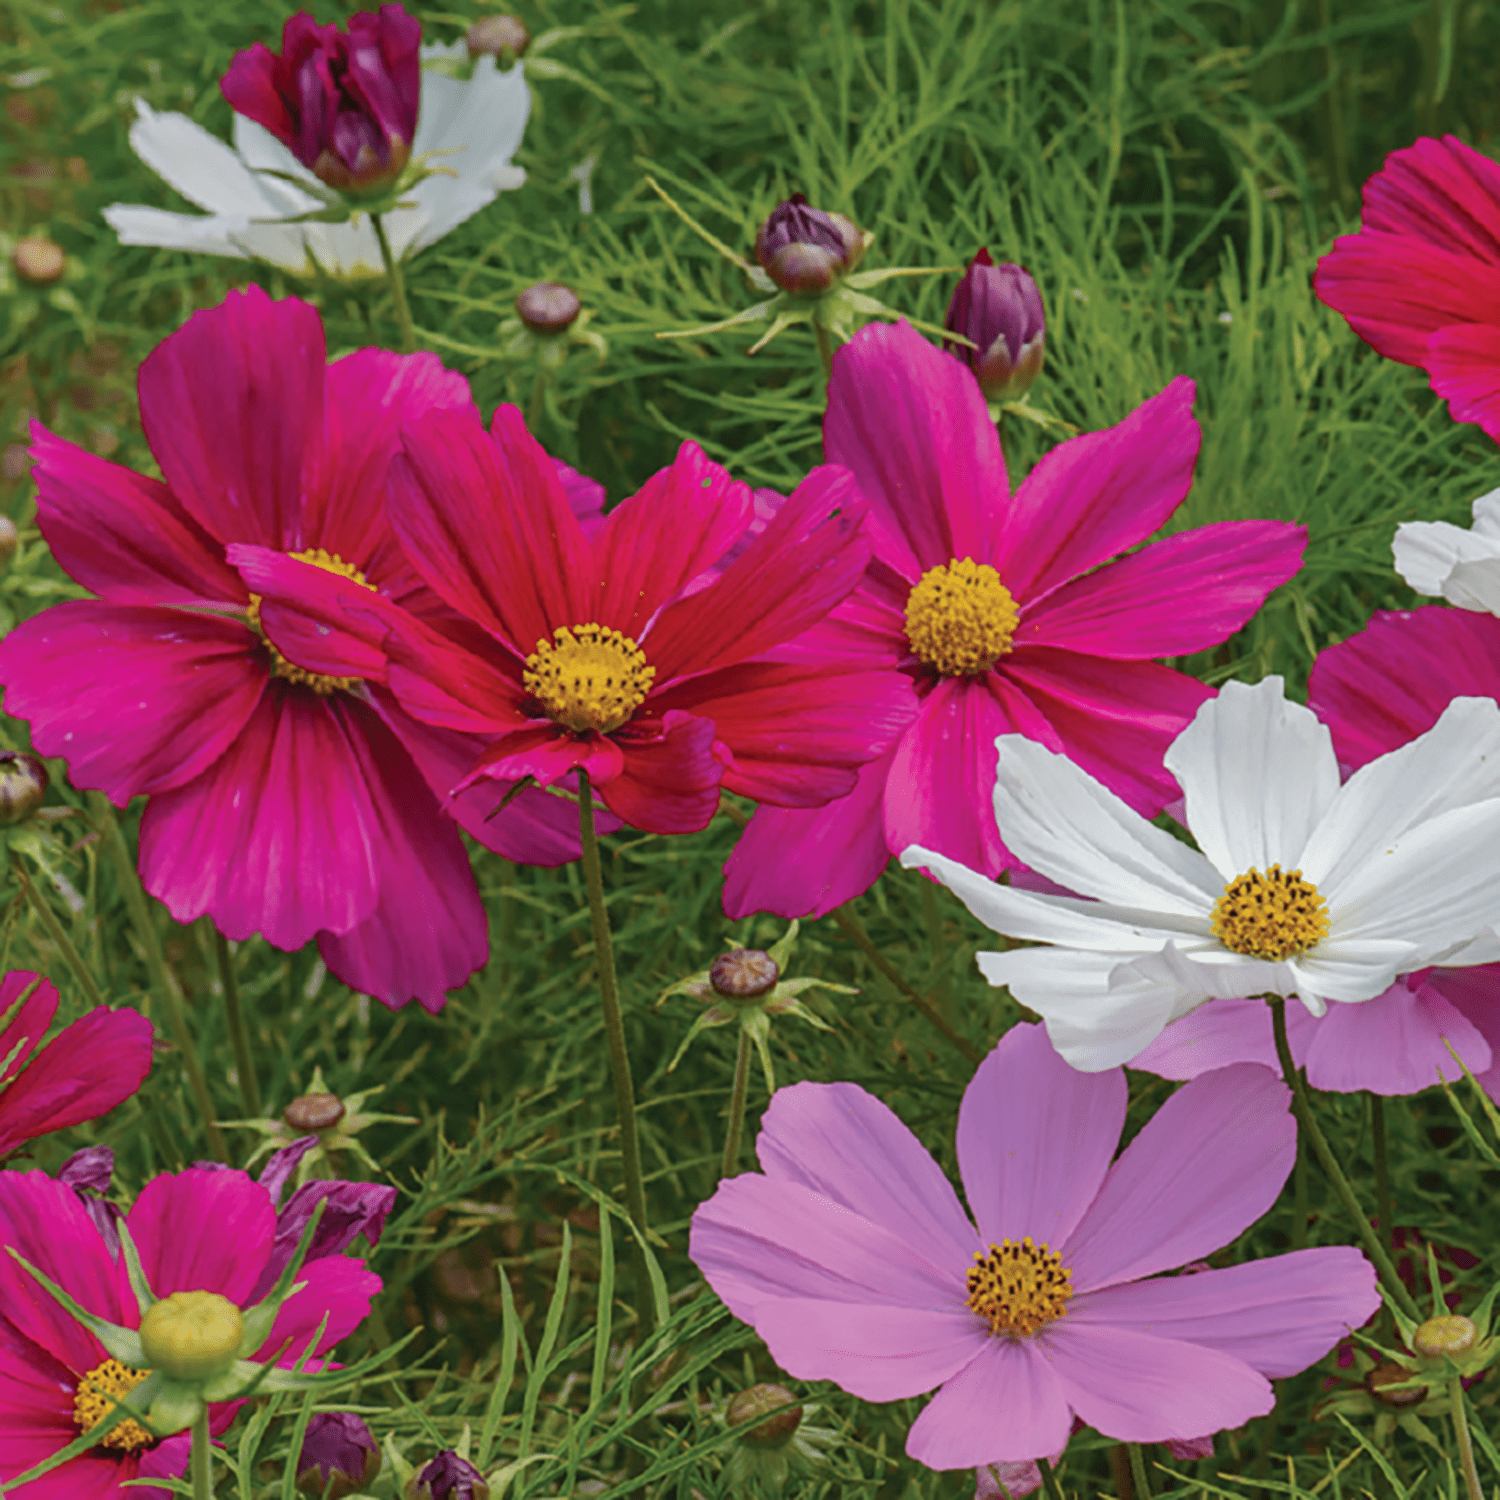 Ferry-Morse Cosmos Dwarf Cutesy Flower Seeds (Seed Packet) 330-mg at